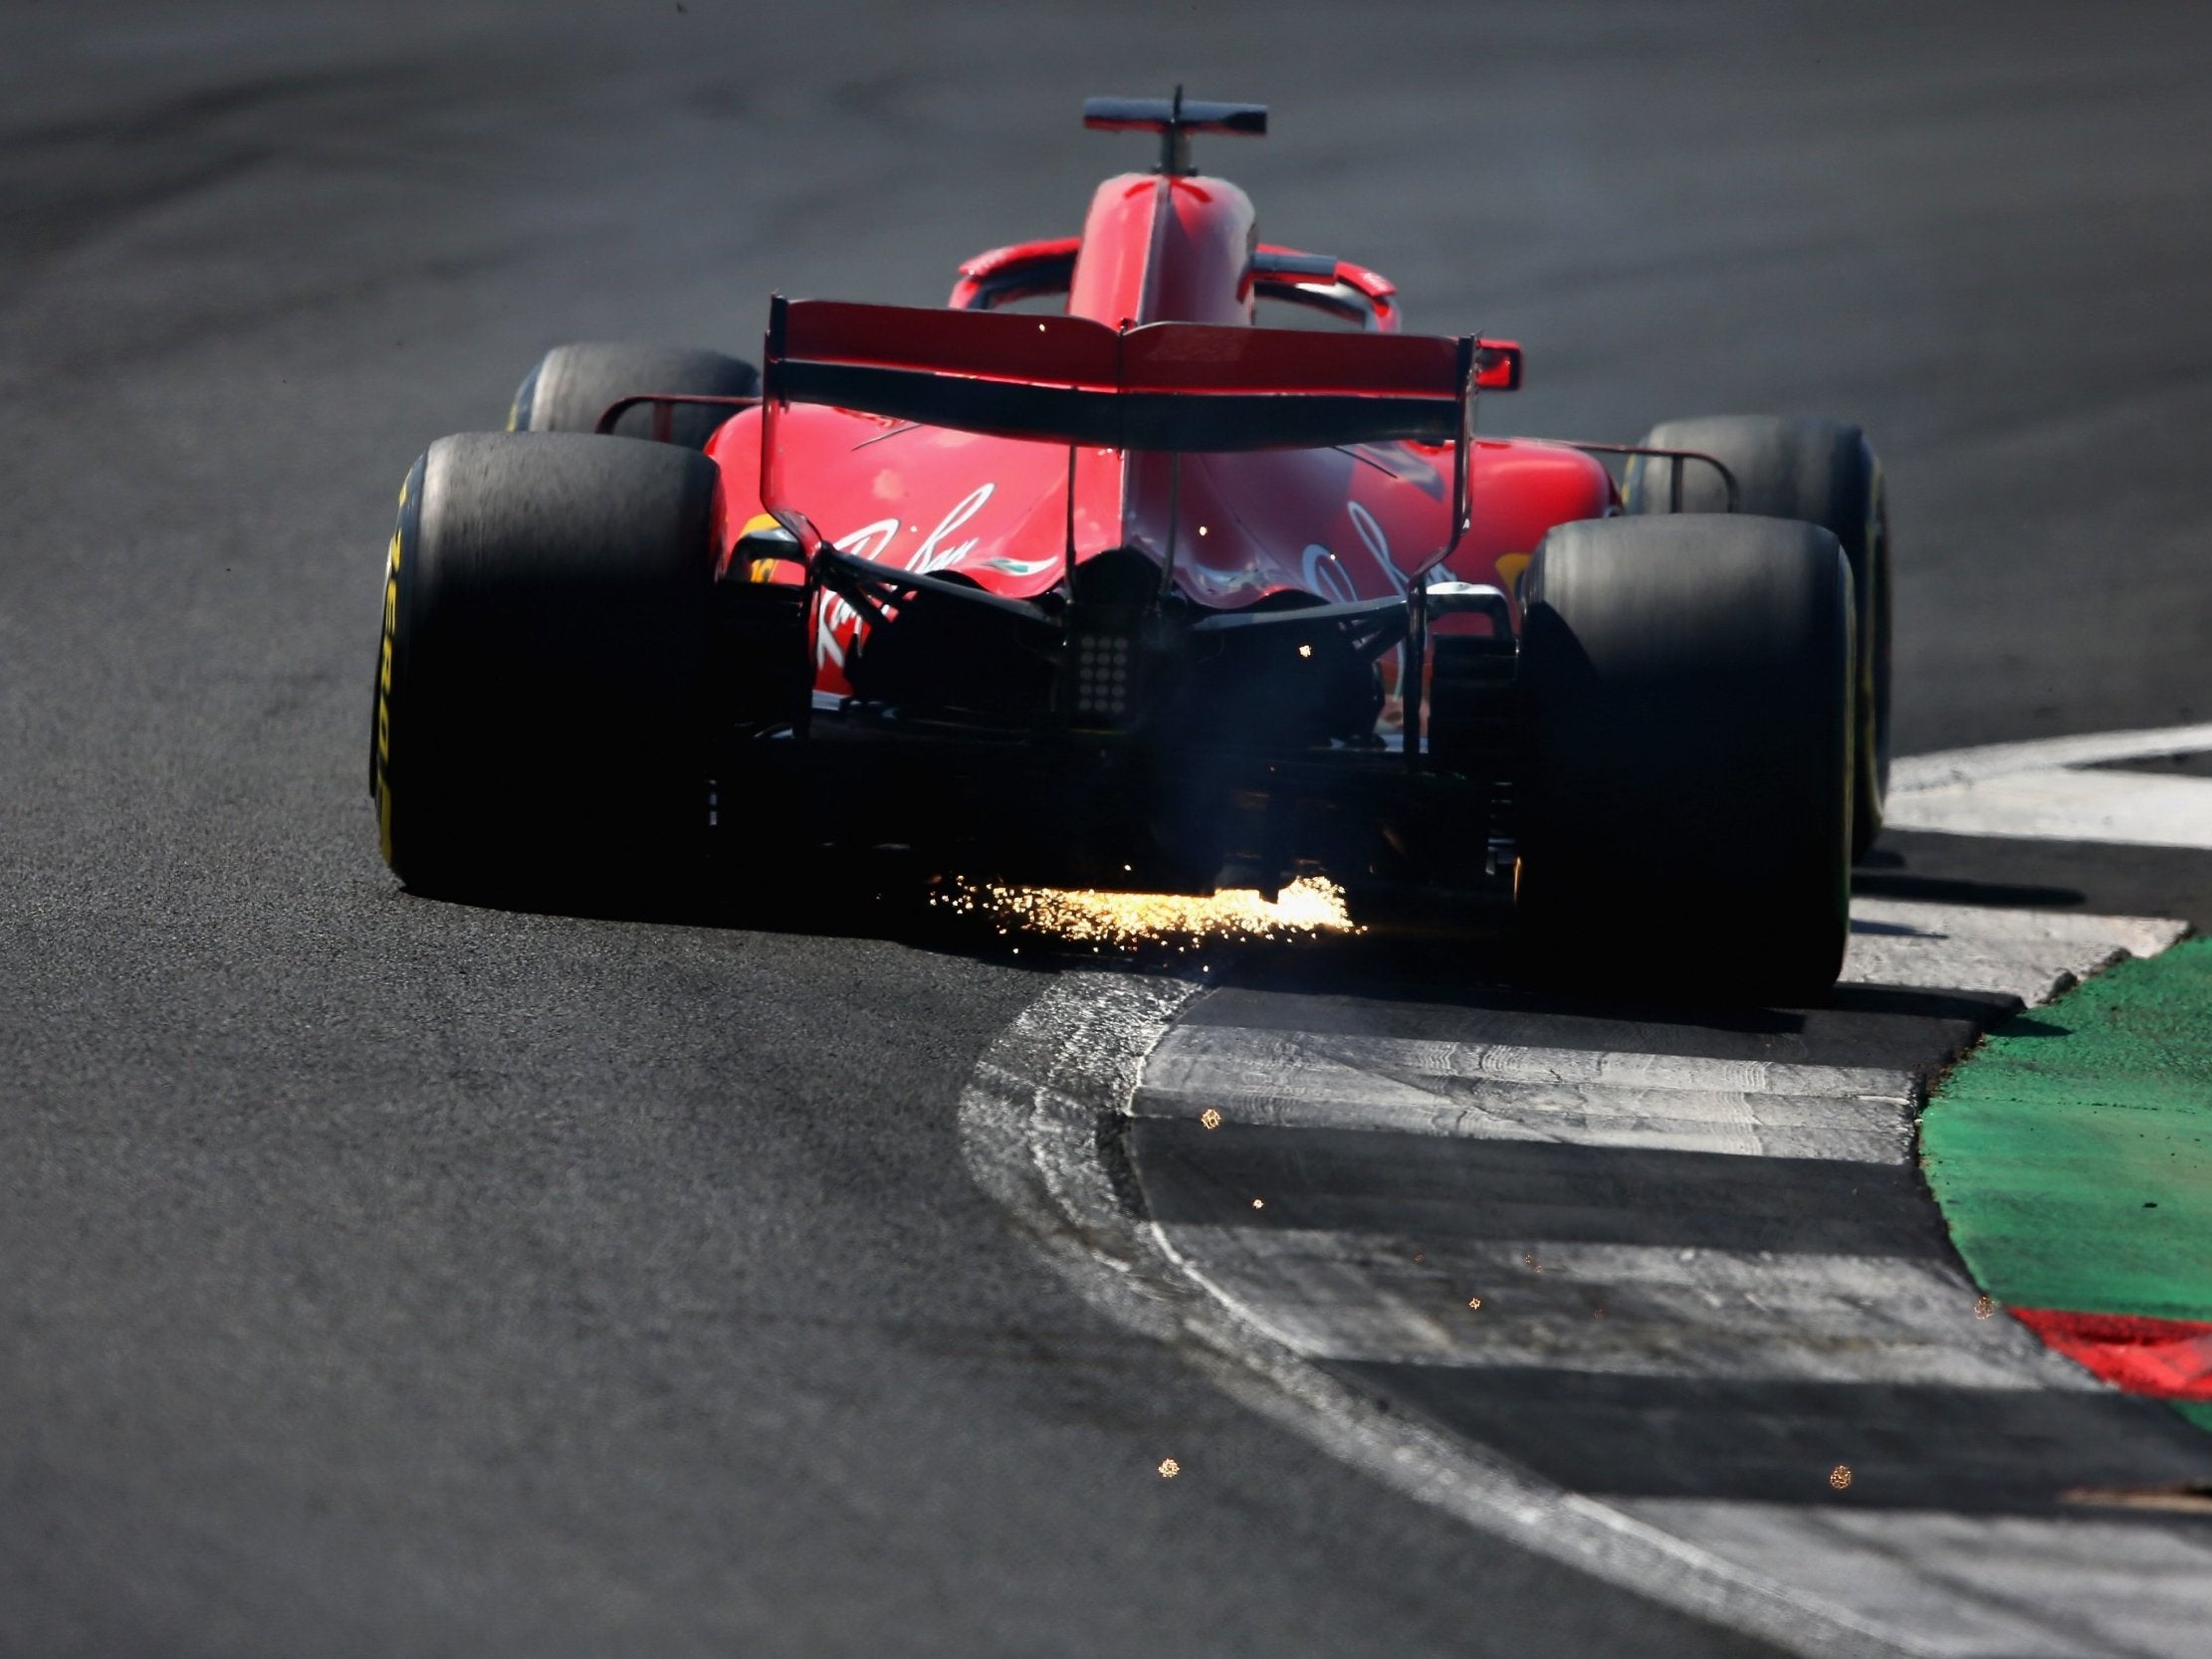 Sebastian Vettel managed to take second and came within a whisker of taking pole